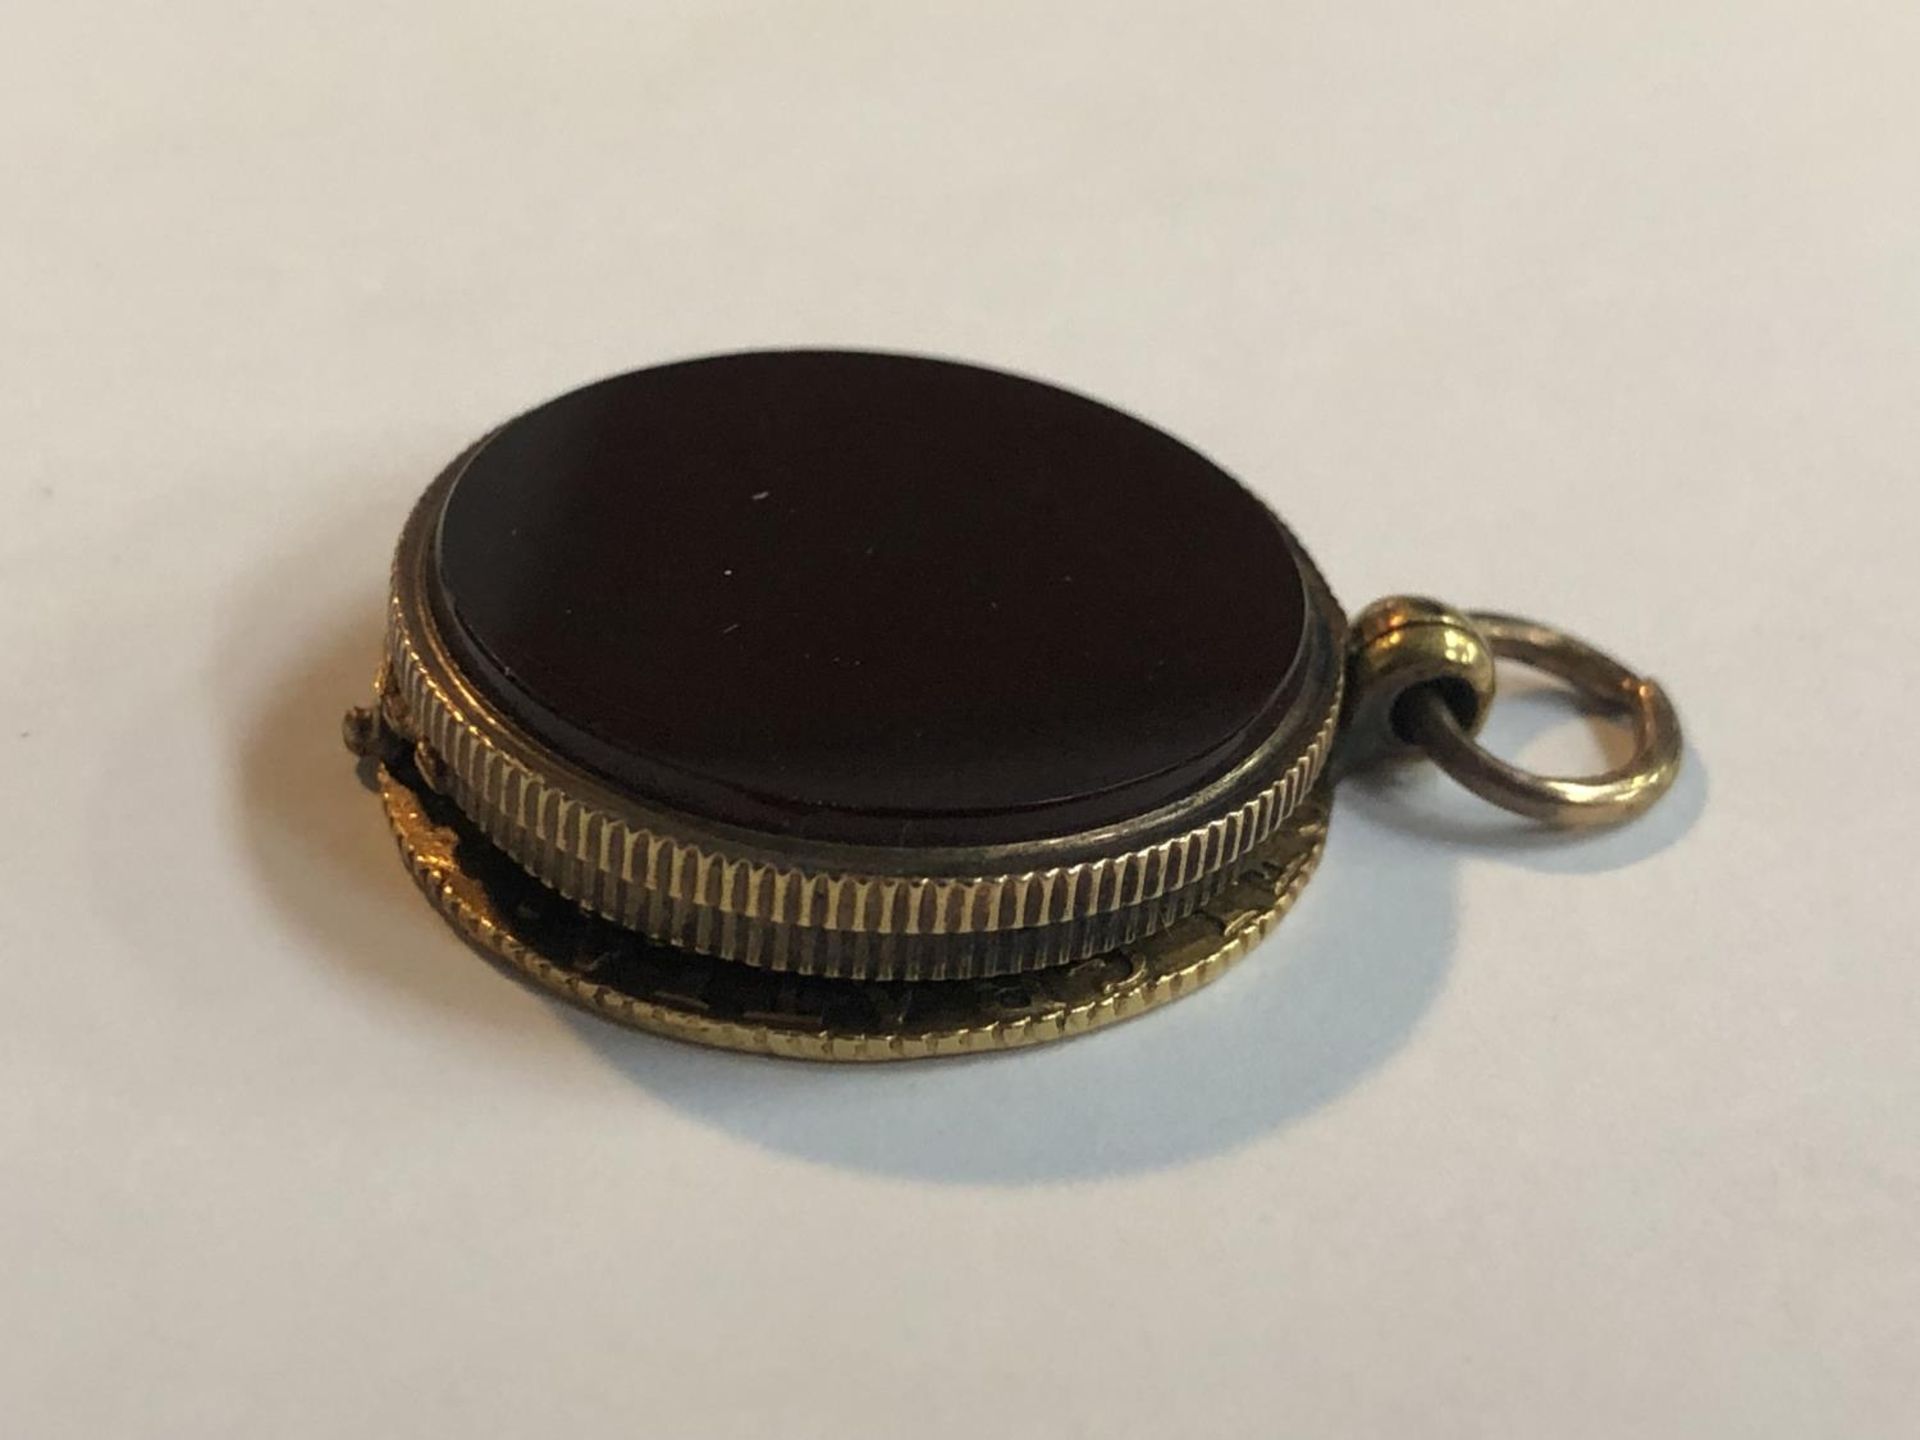 A 1787 GEORGE III 22CT GOLD GUINEA CONVERTED TO A LOCKET PENDANT WITH BLOODSTONE FOB, MOUNT TESTS TO - Image 4 of 6